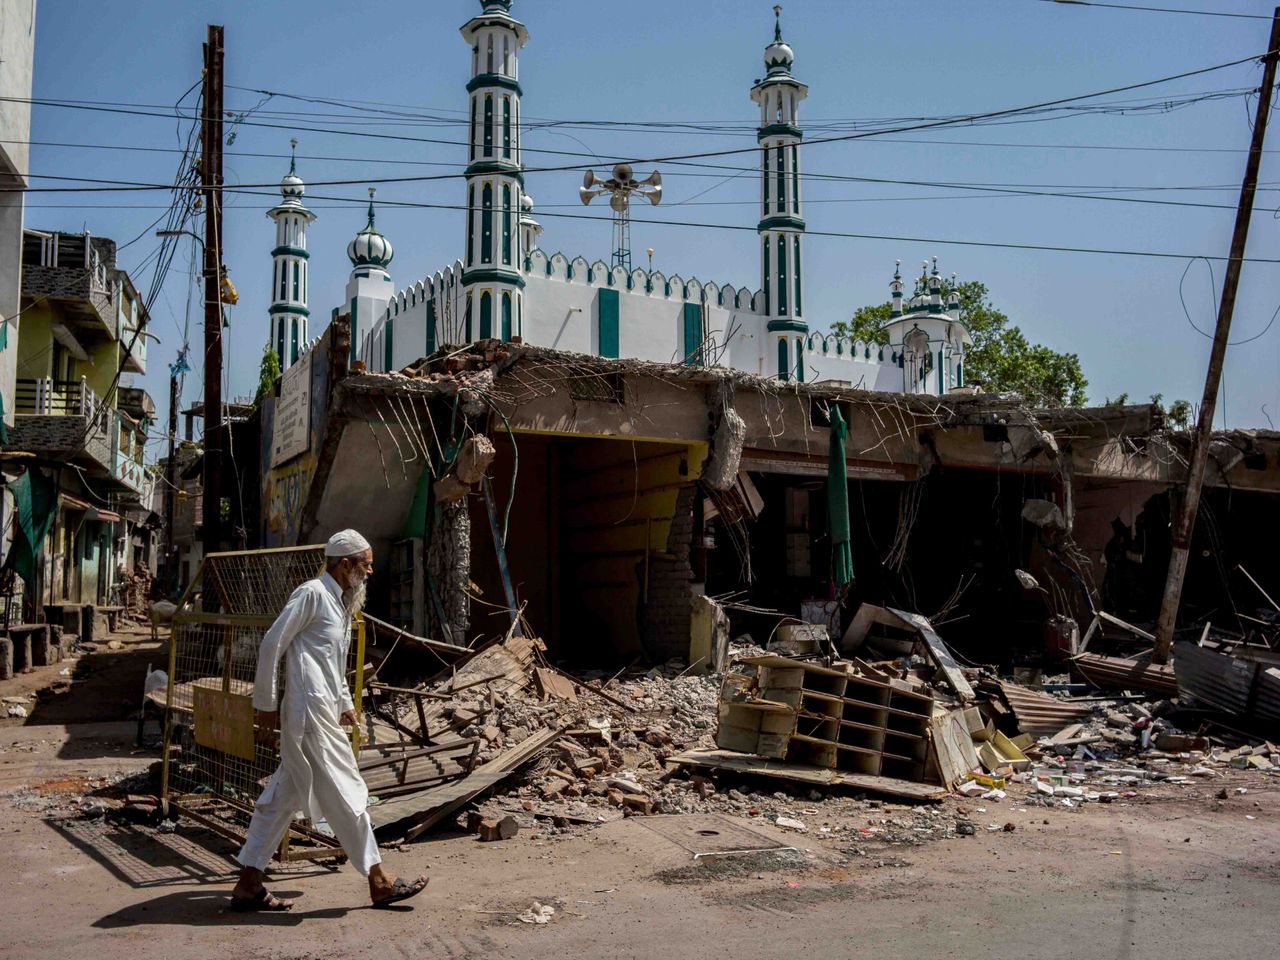 A scene in Khargone, India, where buildings were demolished in mostly Muslim neighbourhoods in the wake of violent clashes, on April 15, 2022. As a national campaign by right-wing groups inflames local tensions, Muslim communities are facing the harshest punishments, according to activists, analysts and retired officials.